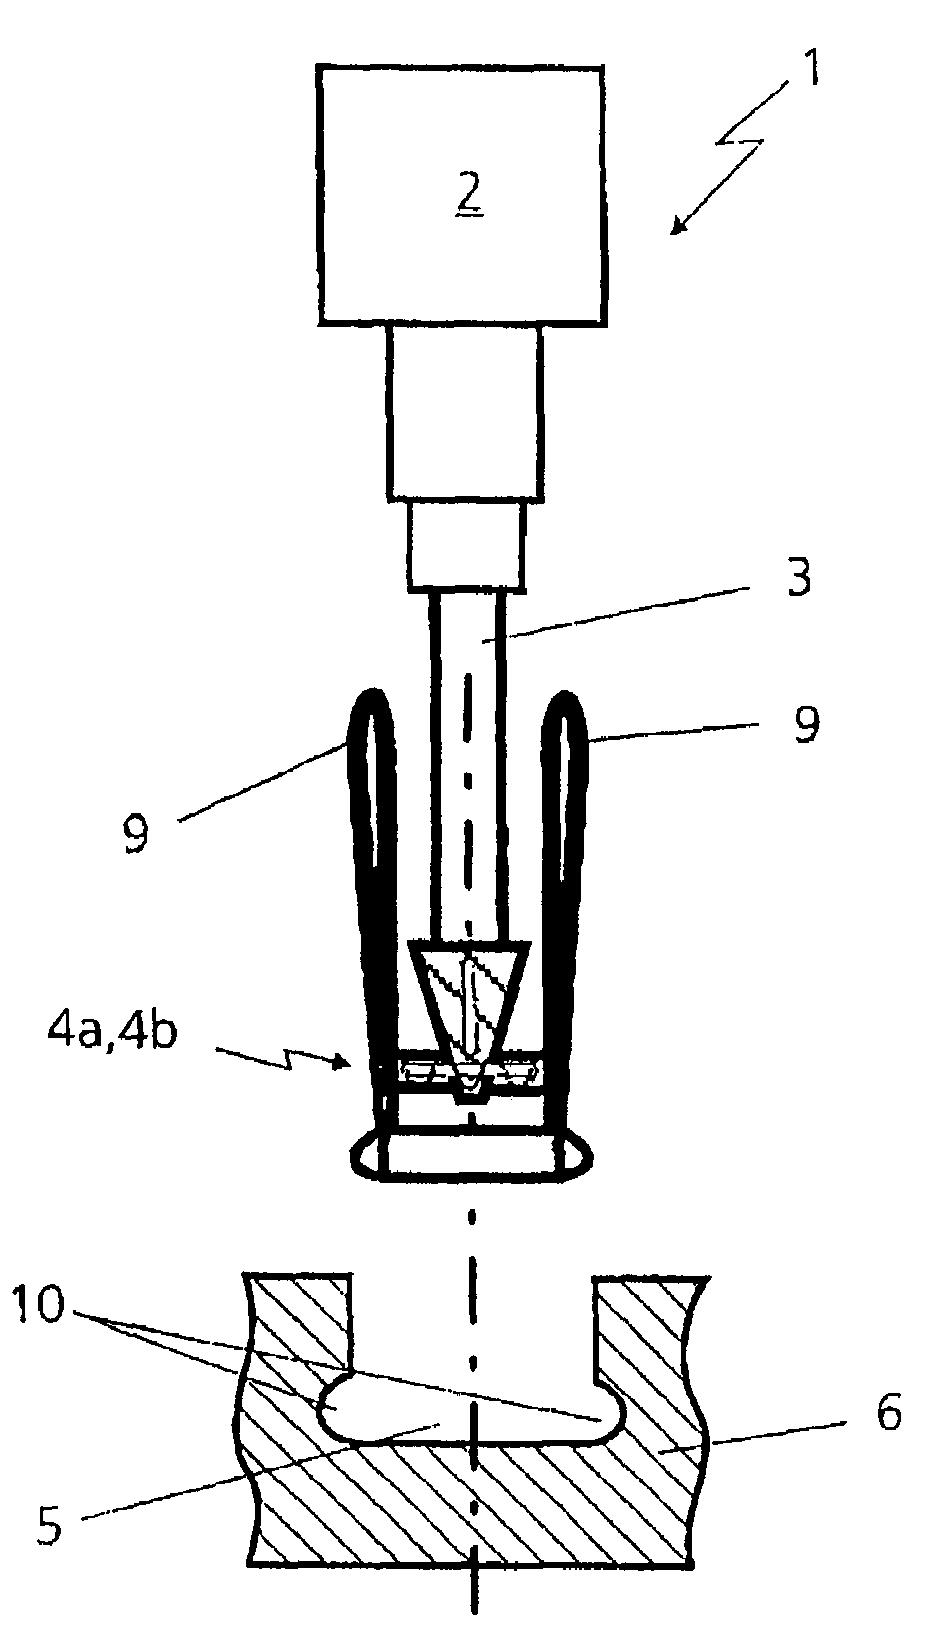 Apparatus for hardening a cylindrical bearing on a shaft by means of induction heating utilizing an elastic element